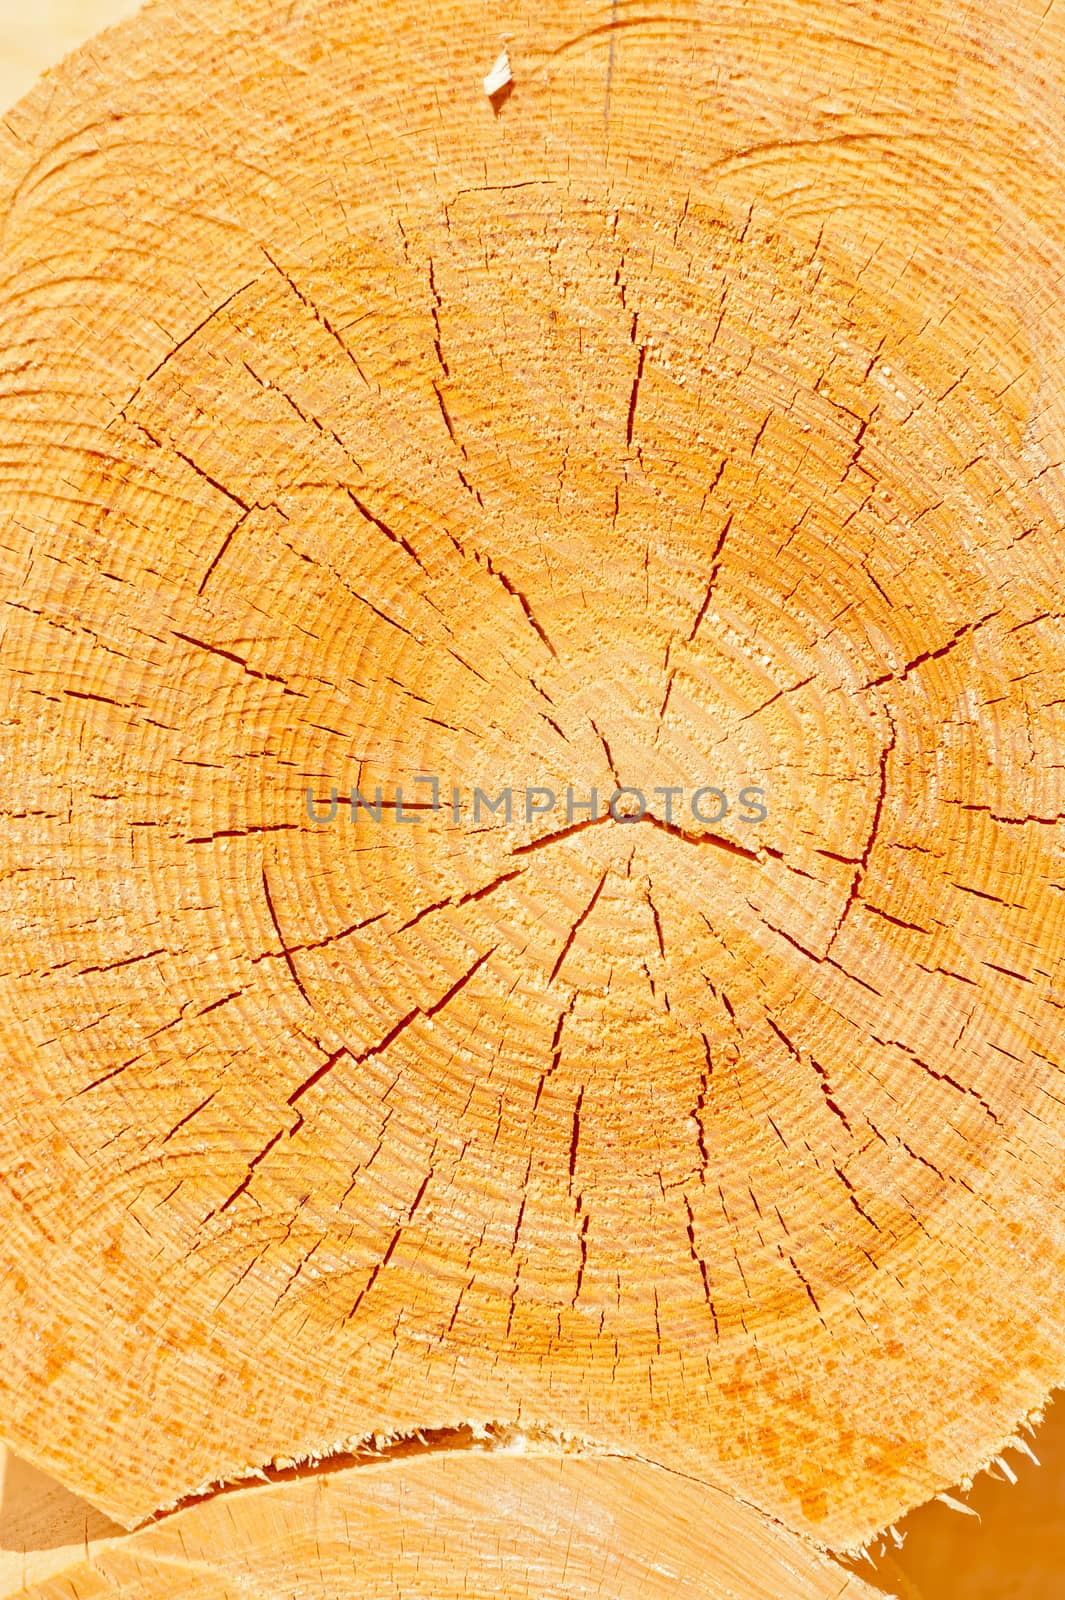 cross-section of a tree close up by kosmsos111